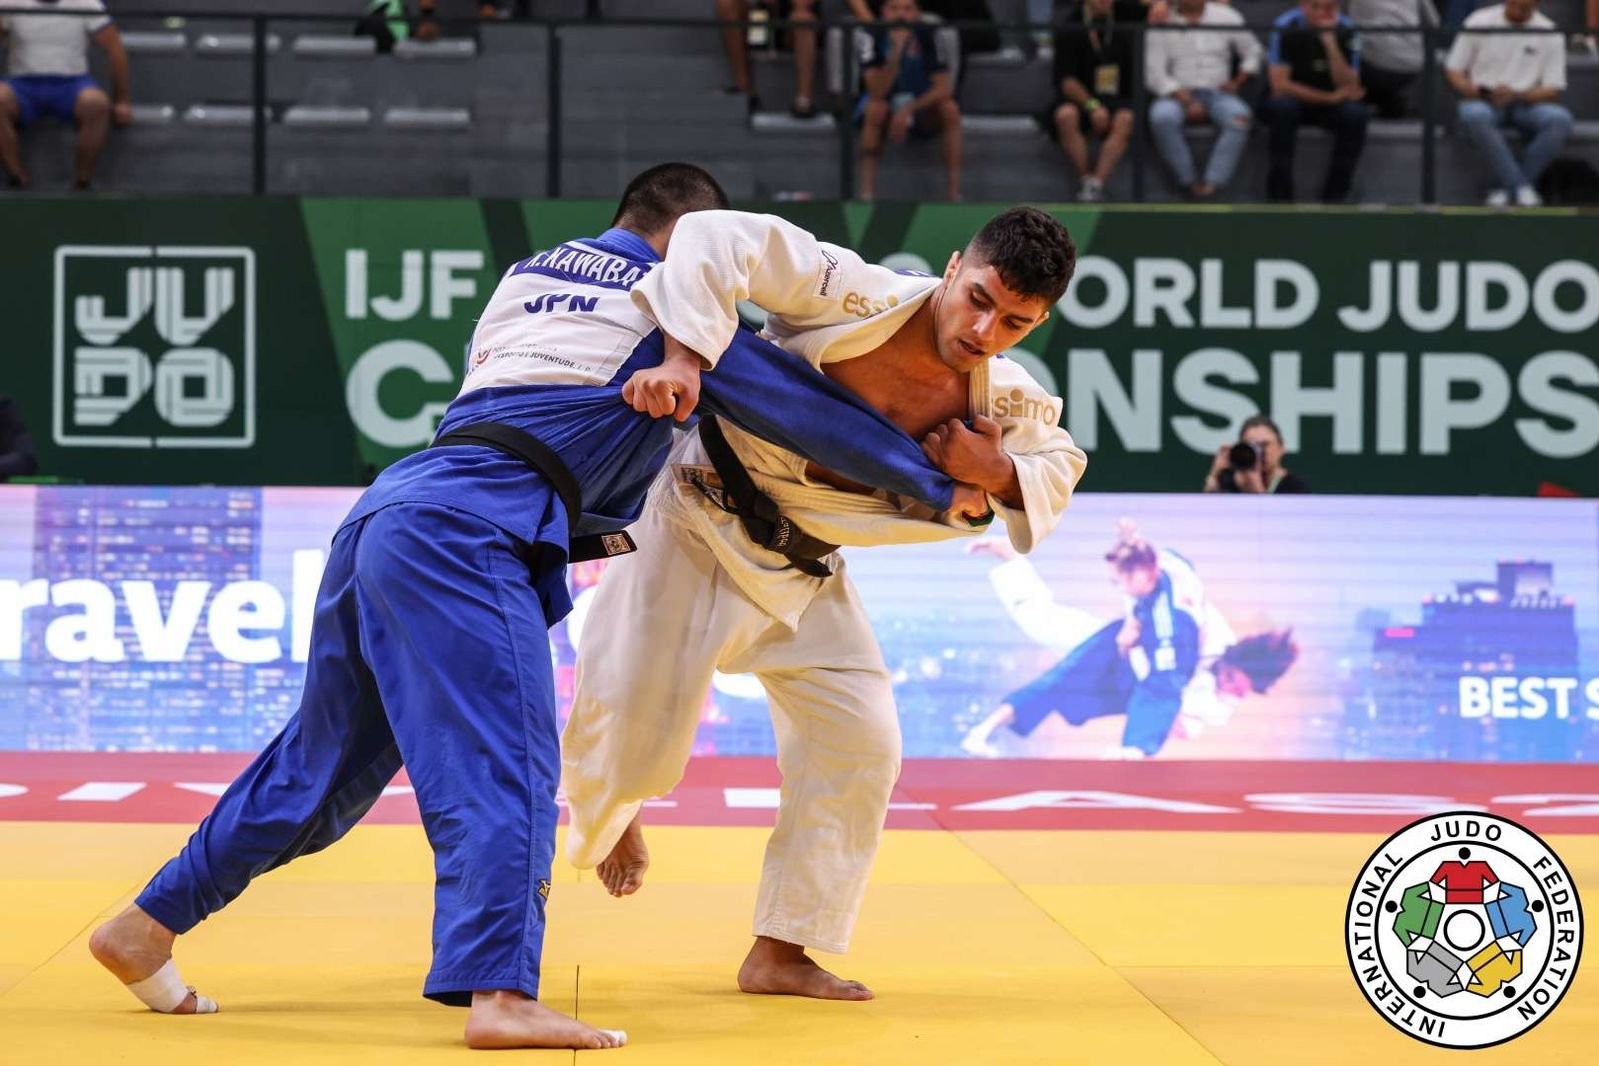 Azerbaijan finished the Grand Slam with 2 bronze medals